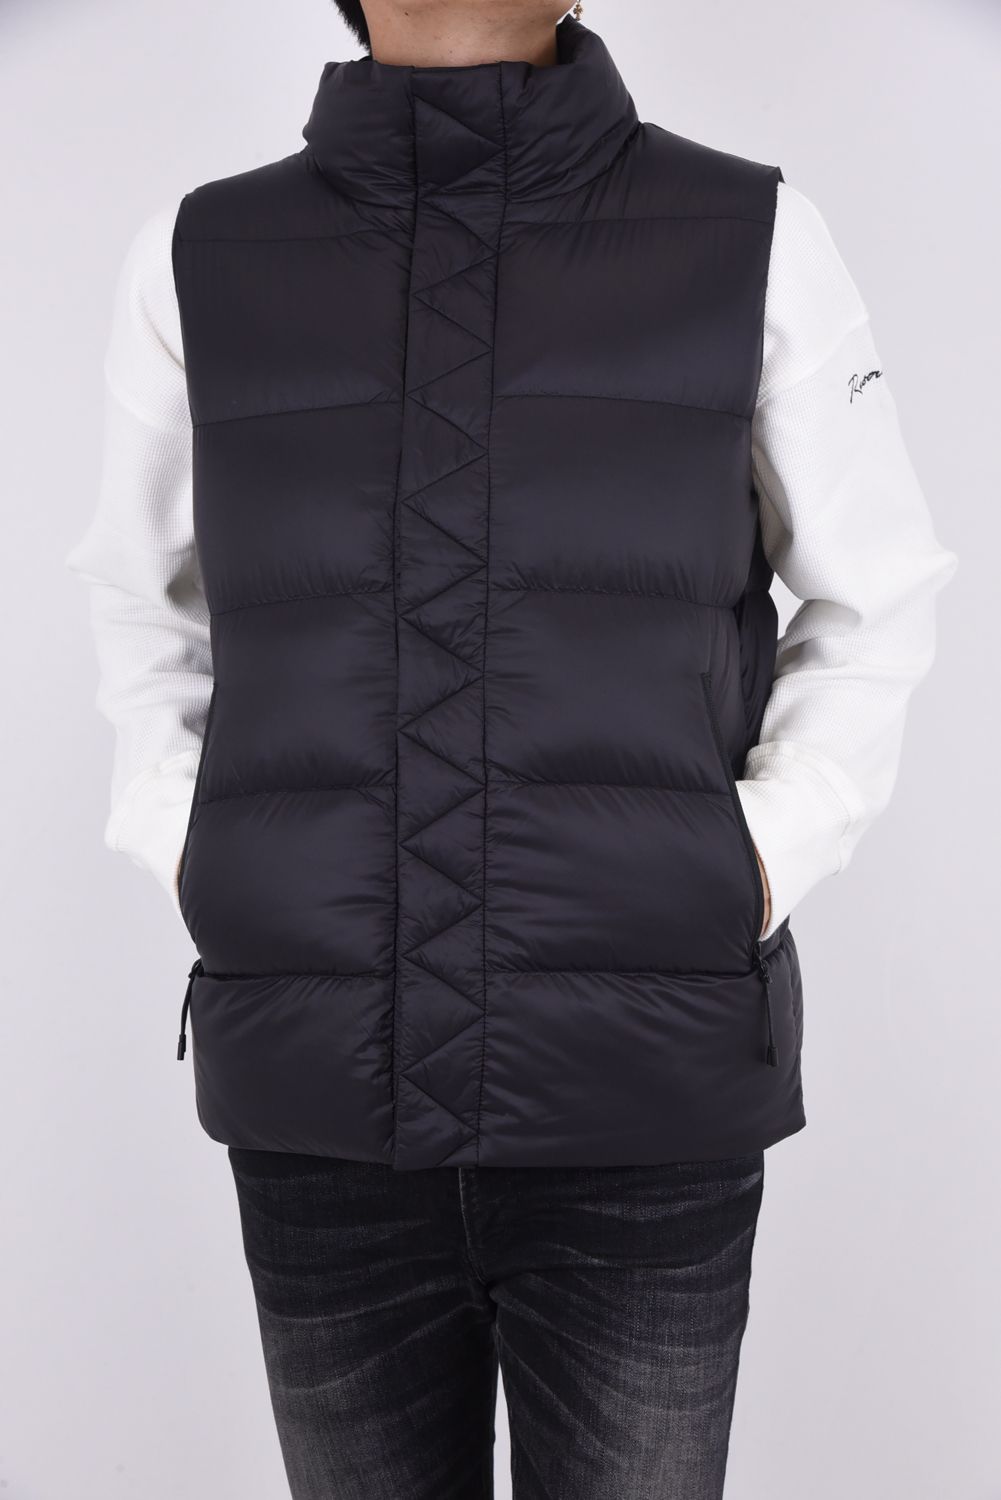 Liningナイロン100%WMBC × TAION REVERSIBLE DOWN VEST